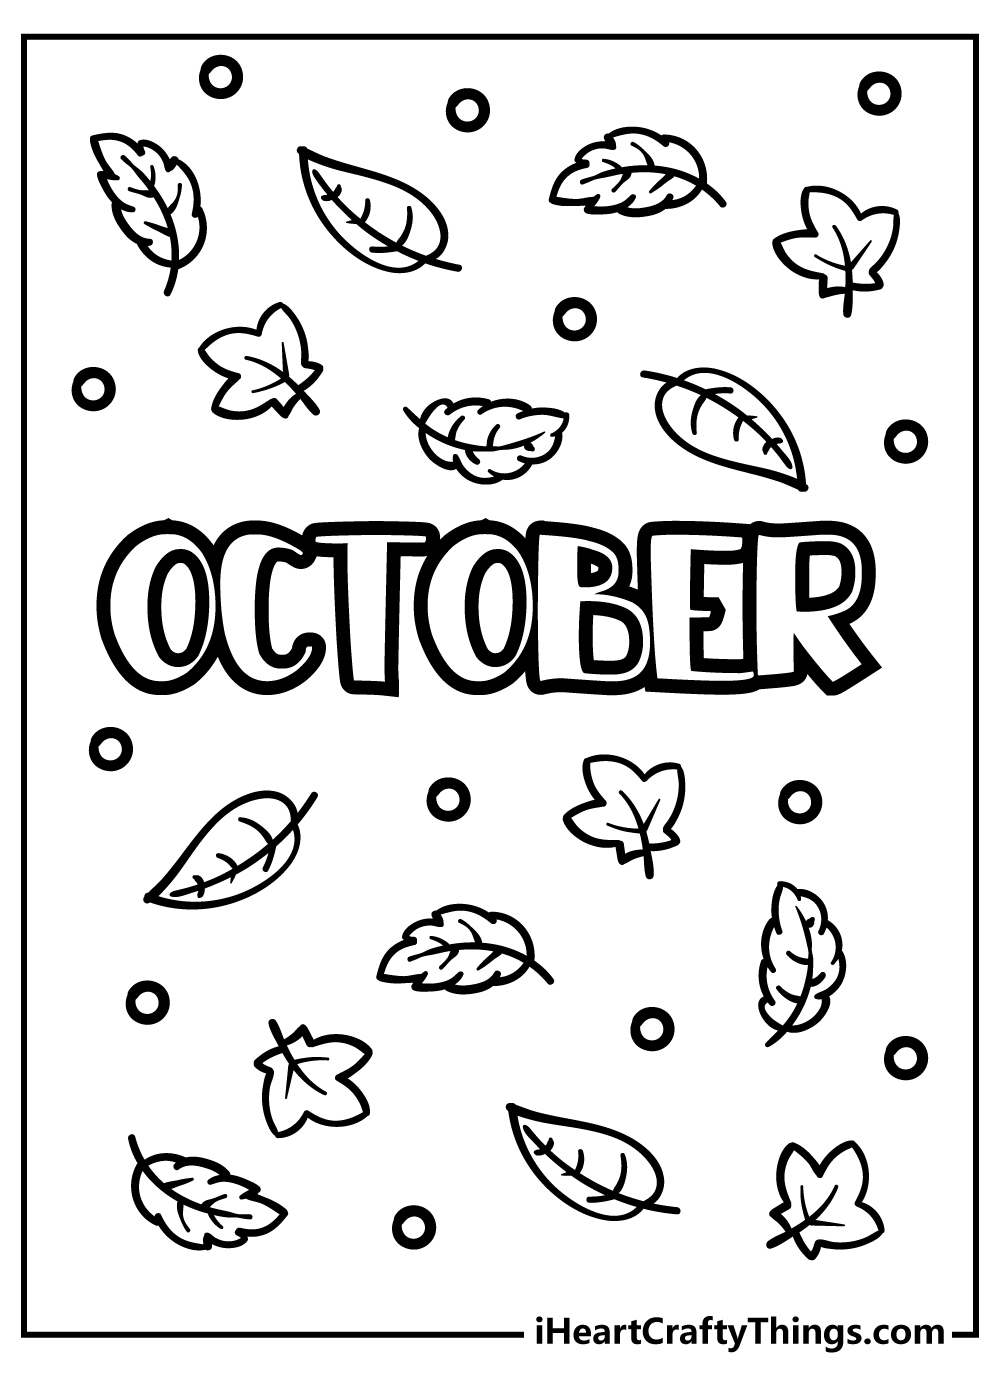 October Coloring Pages for preschoolers free printable